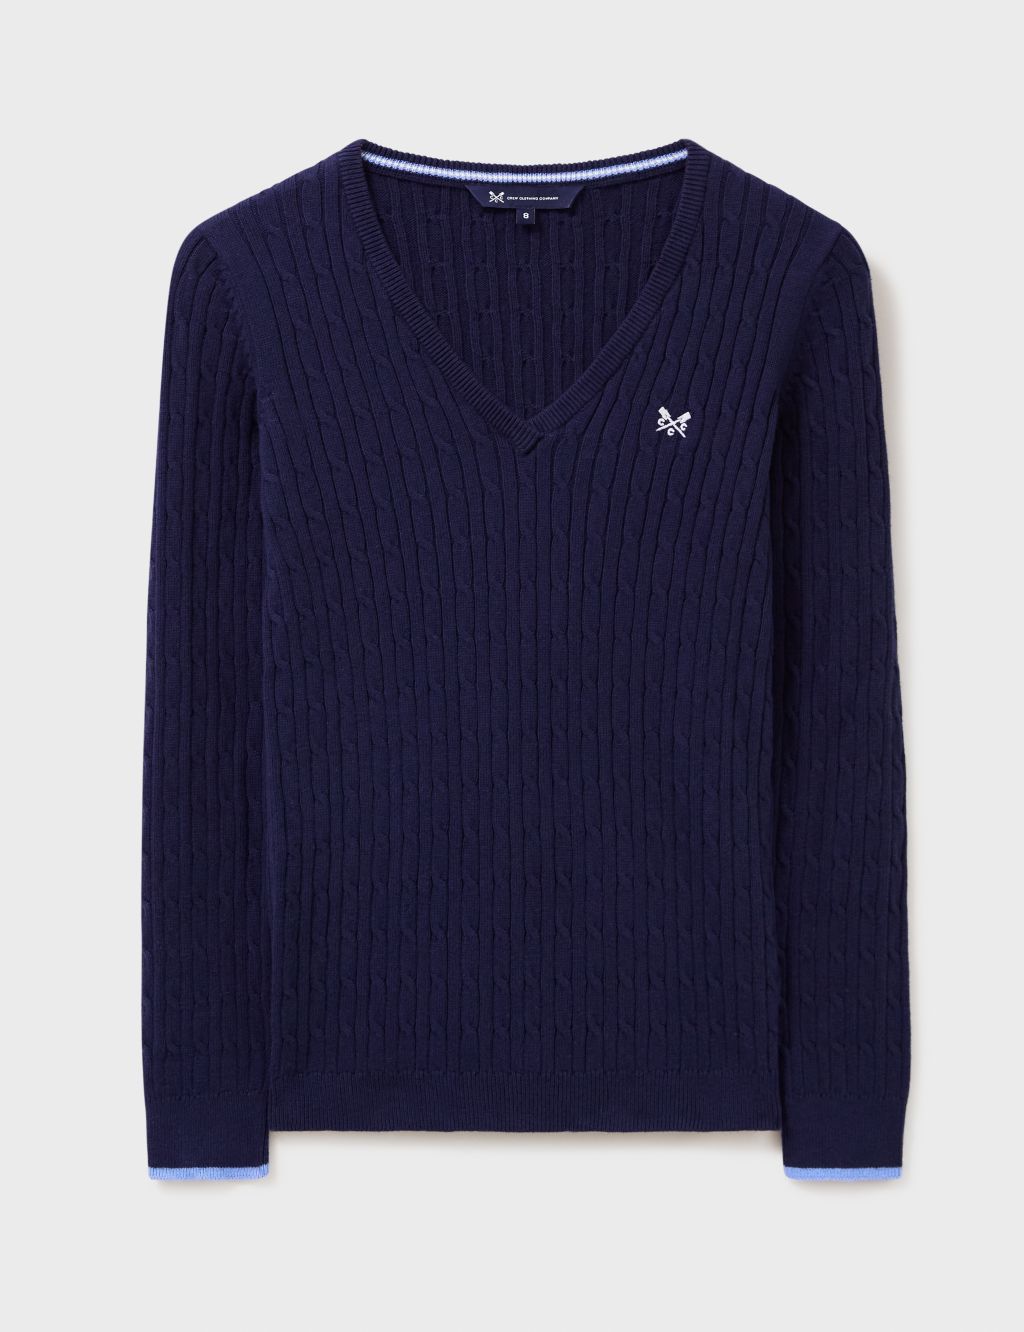 Cotton Rich Cable Knit V-Neck Jumper | Crew Clothing | M&S